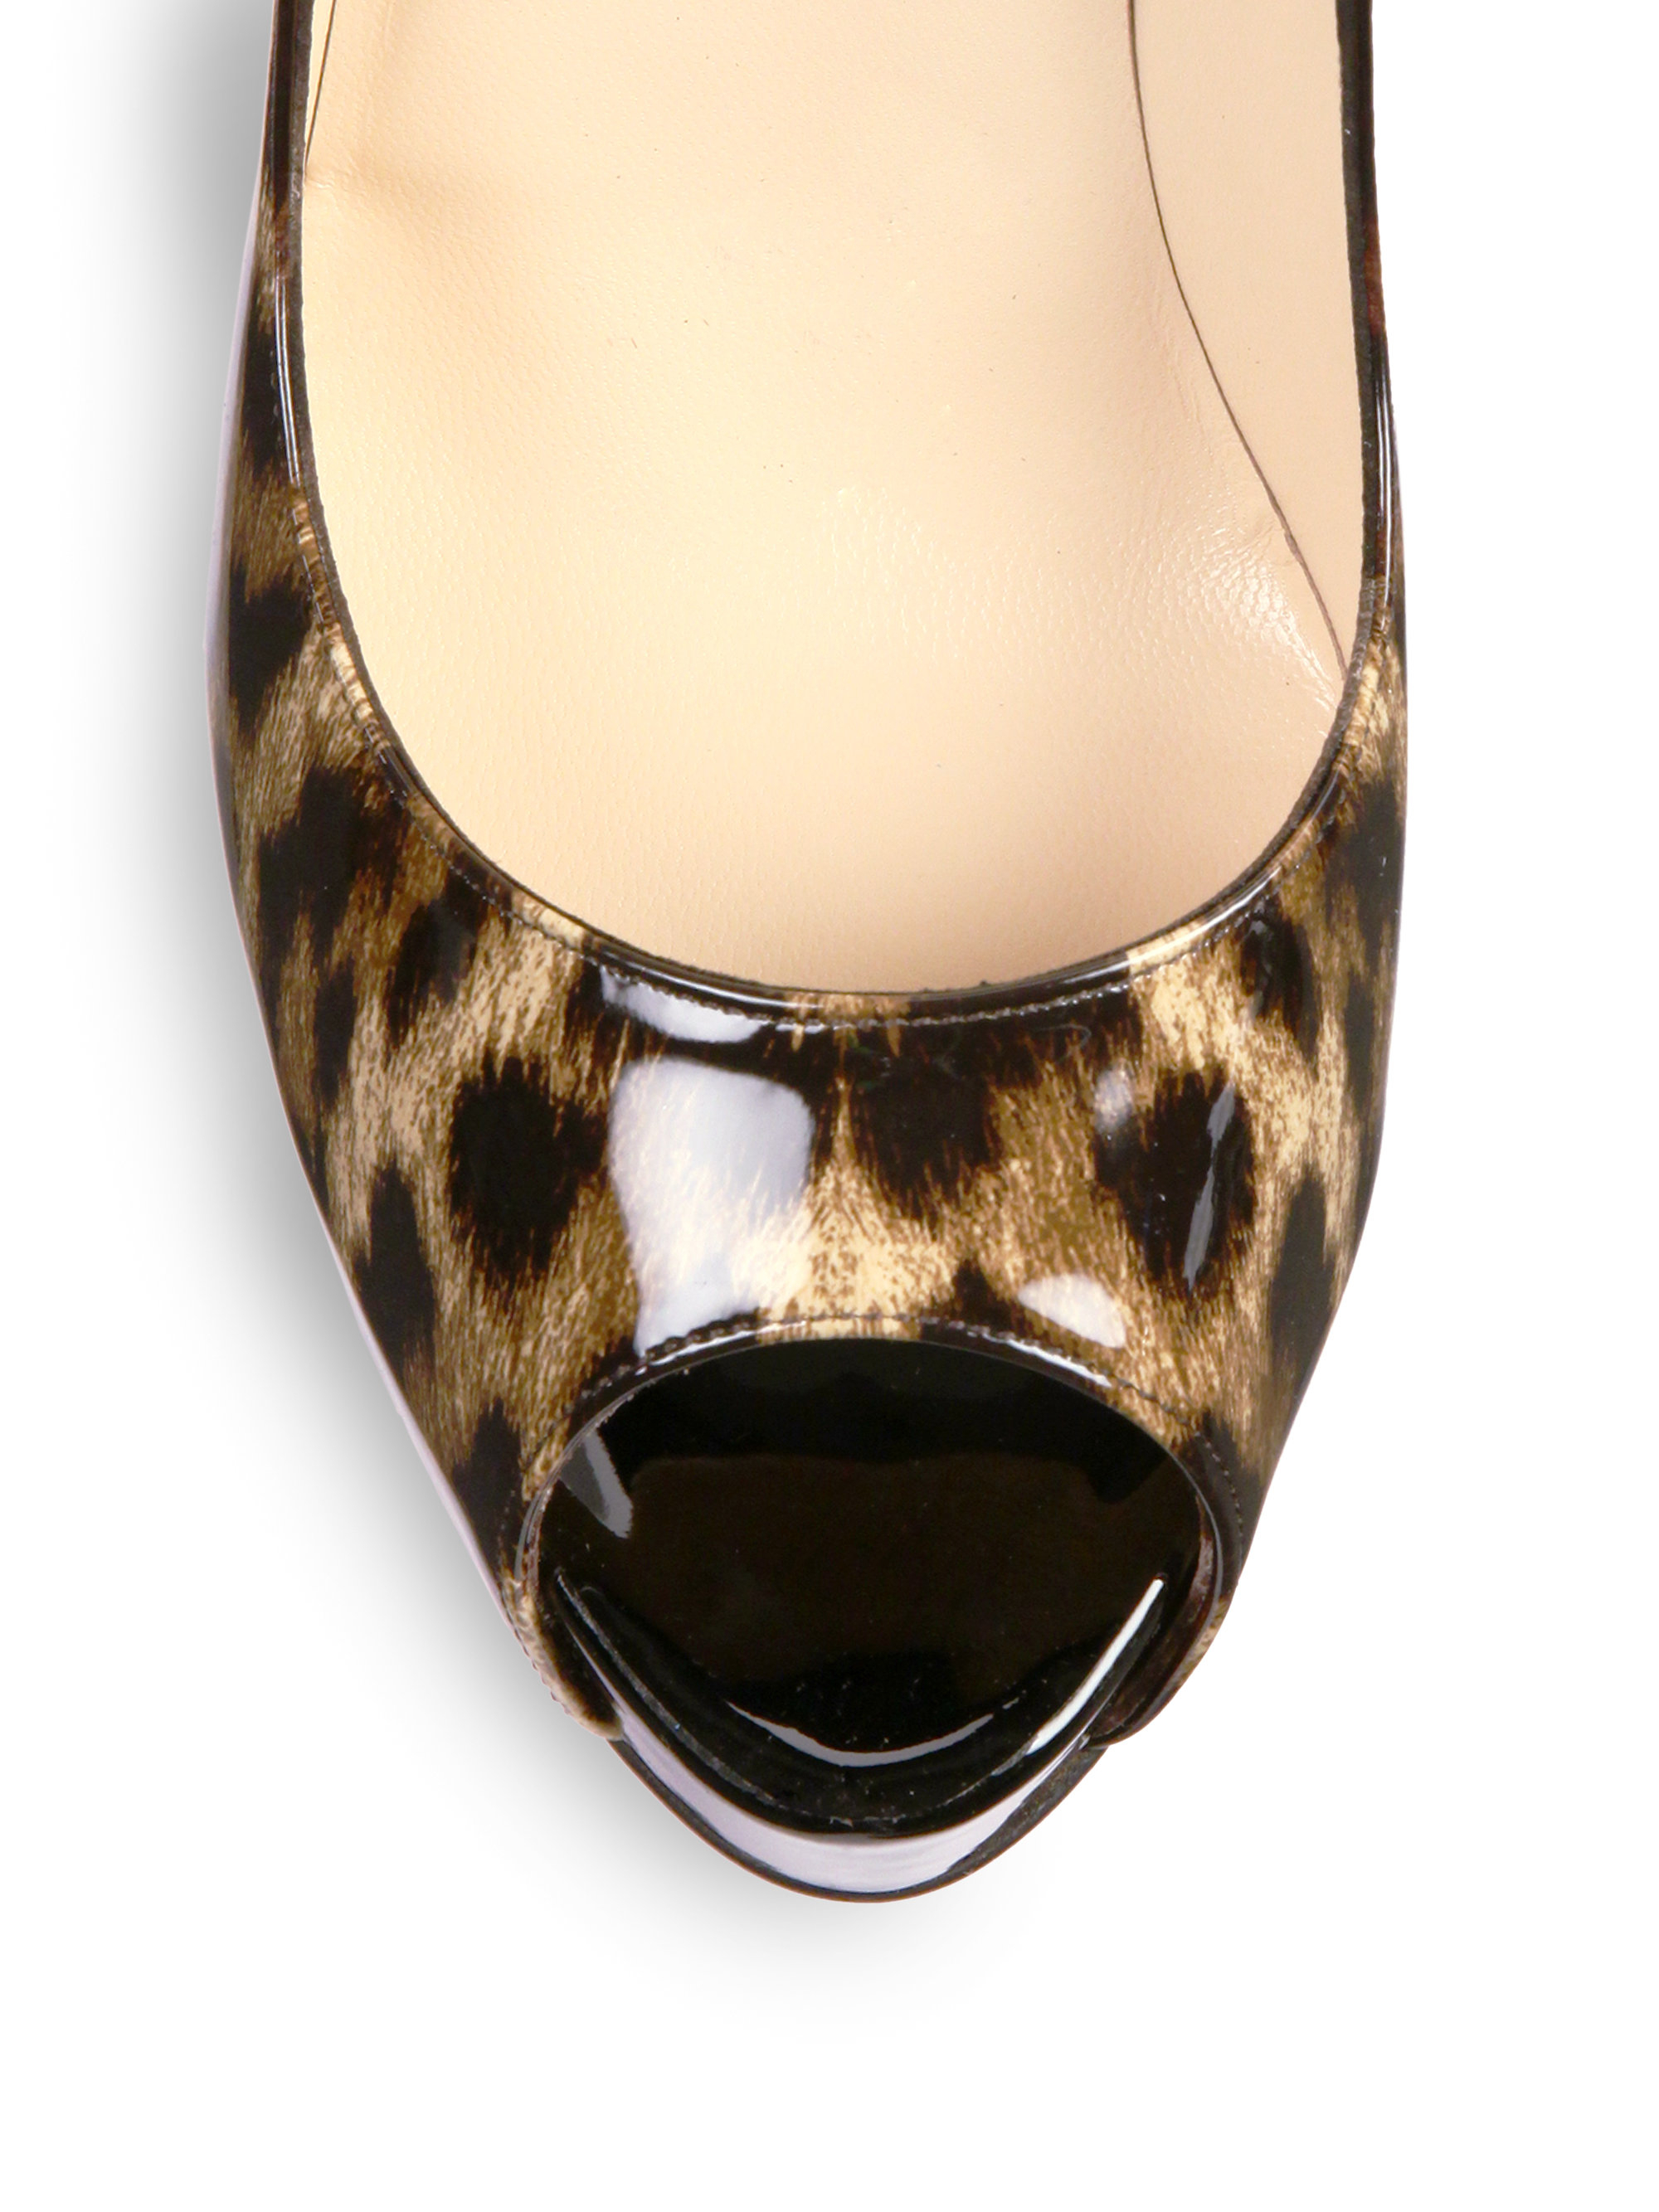 Christian louboutin Very Prive Leopard-Print Patent Pumps in ...